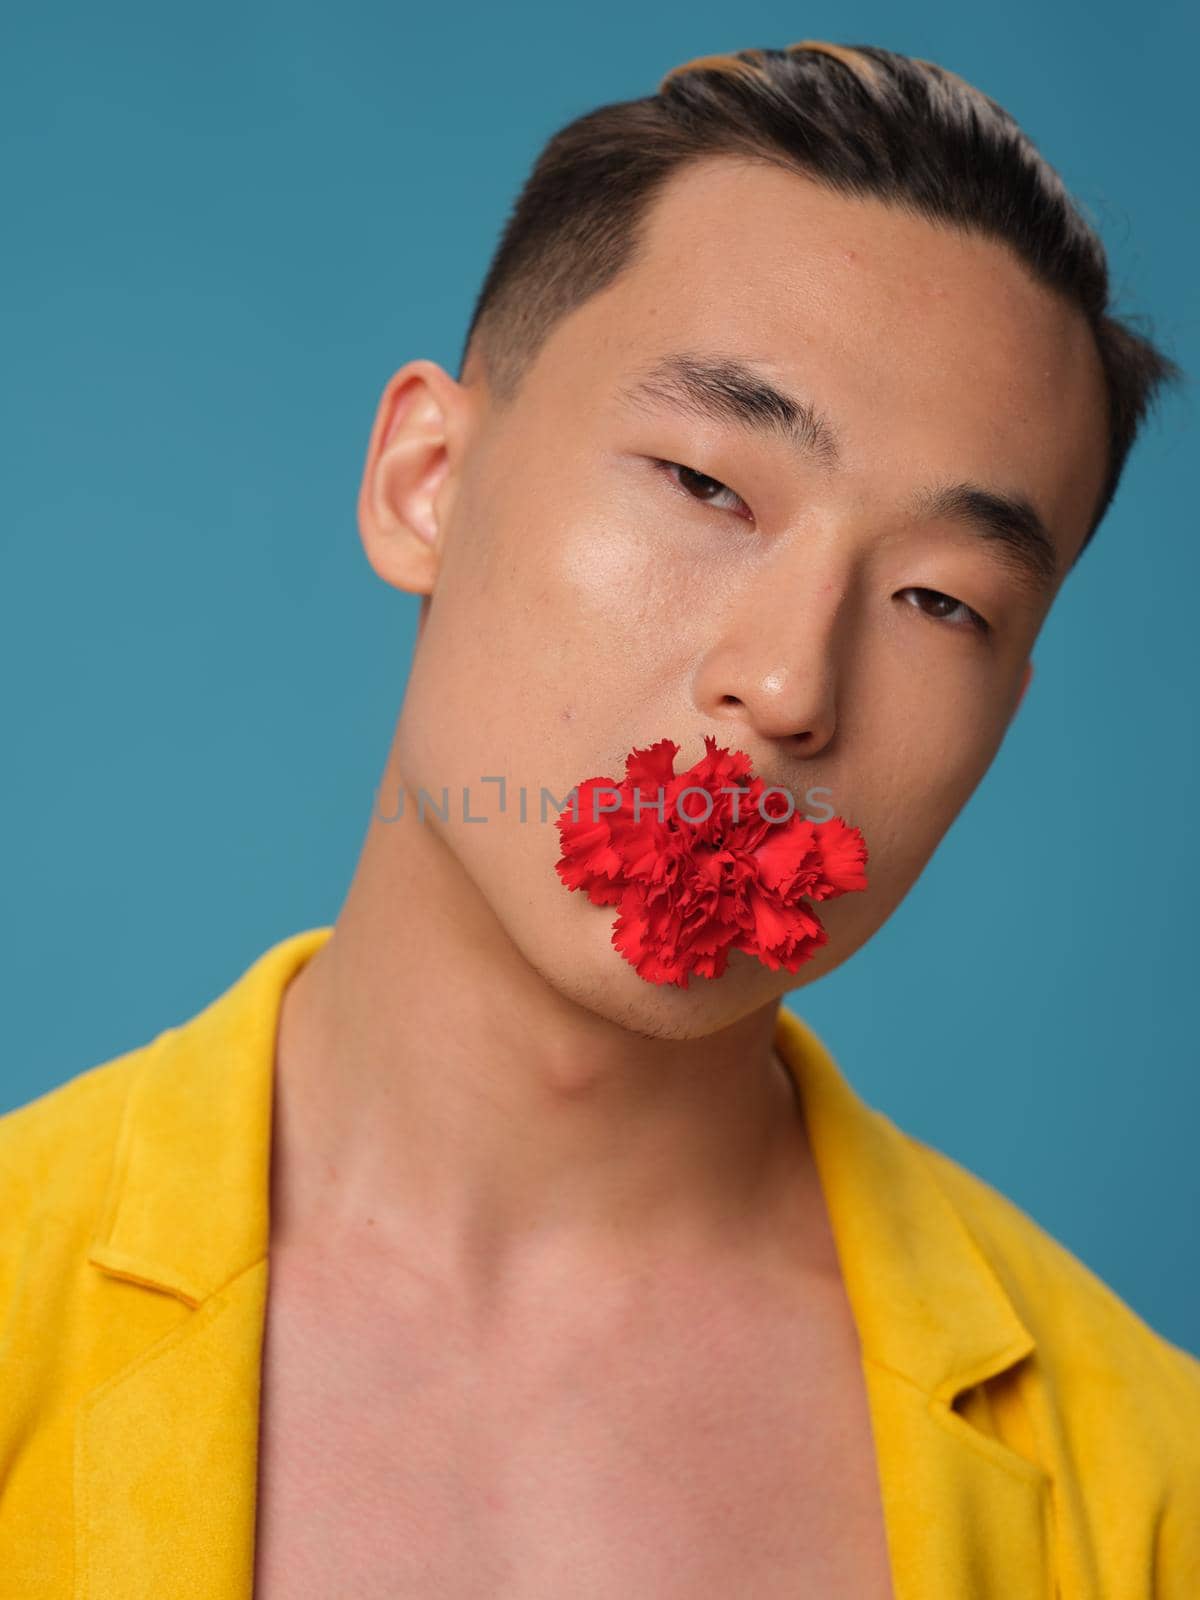 Portrait of a Korean man with a red flower in his mouth and a yellow jacket. High quality photo